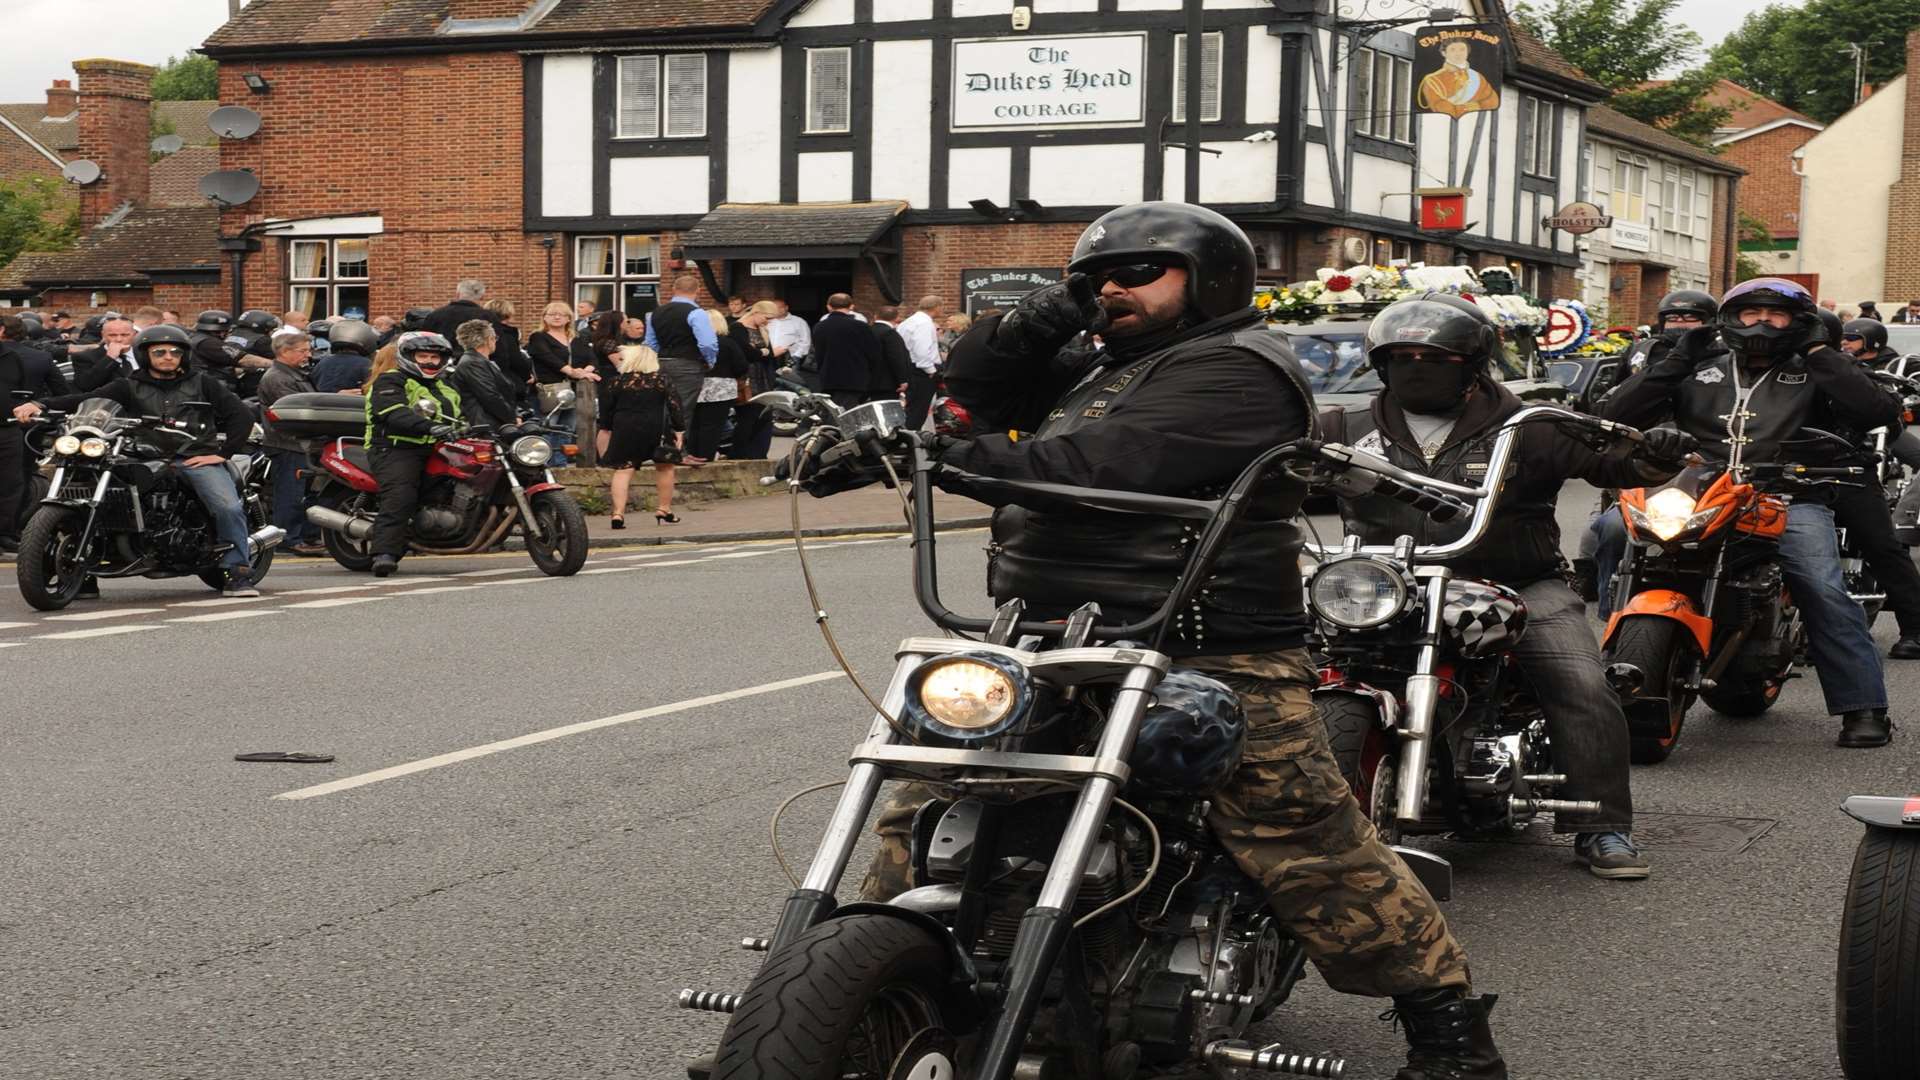 Bikers set off to block roads for Ollie's Last Ride